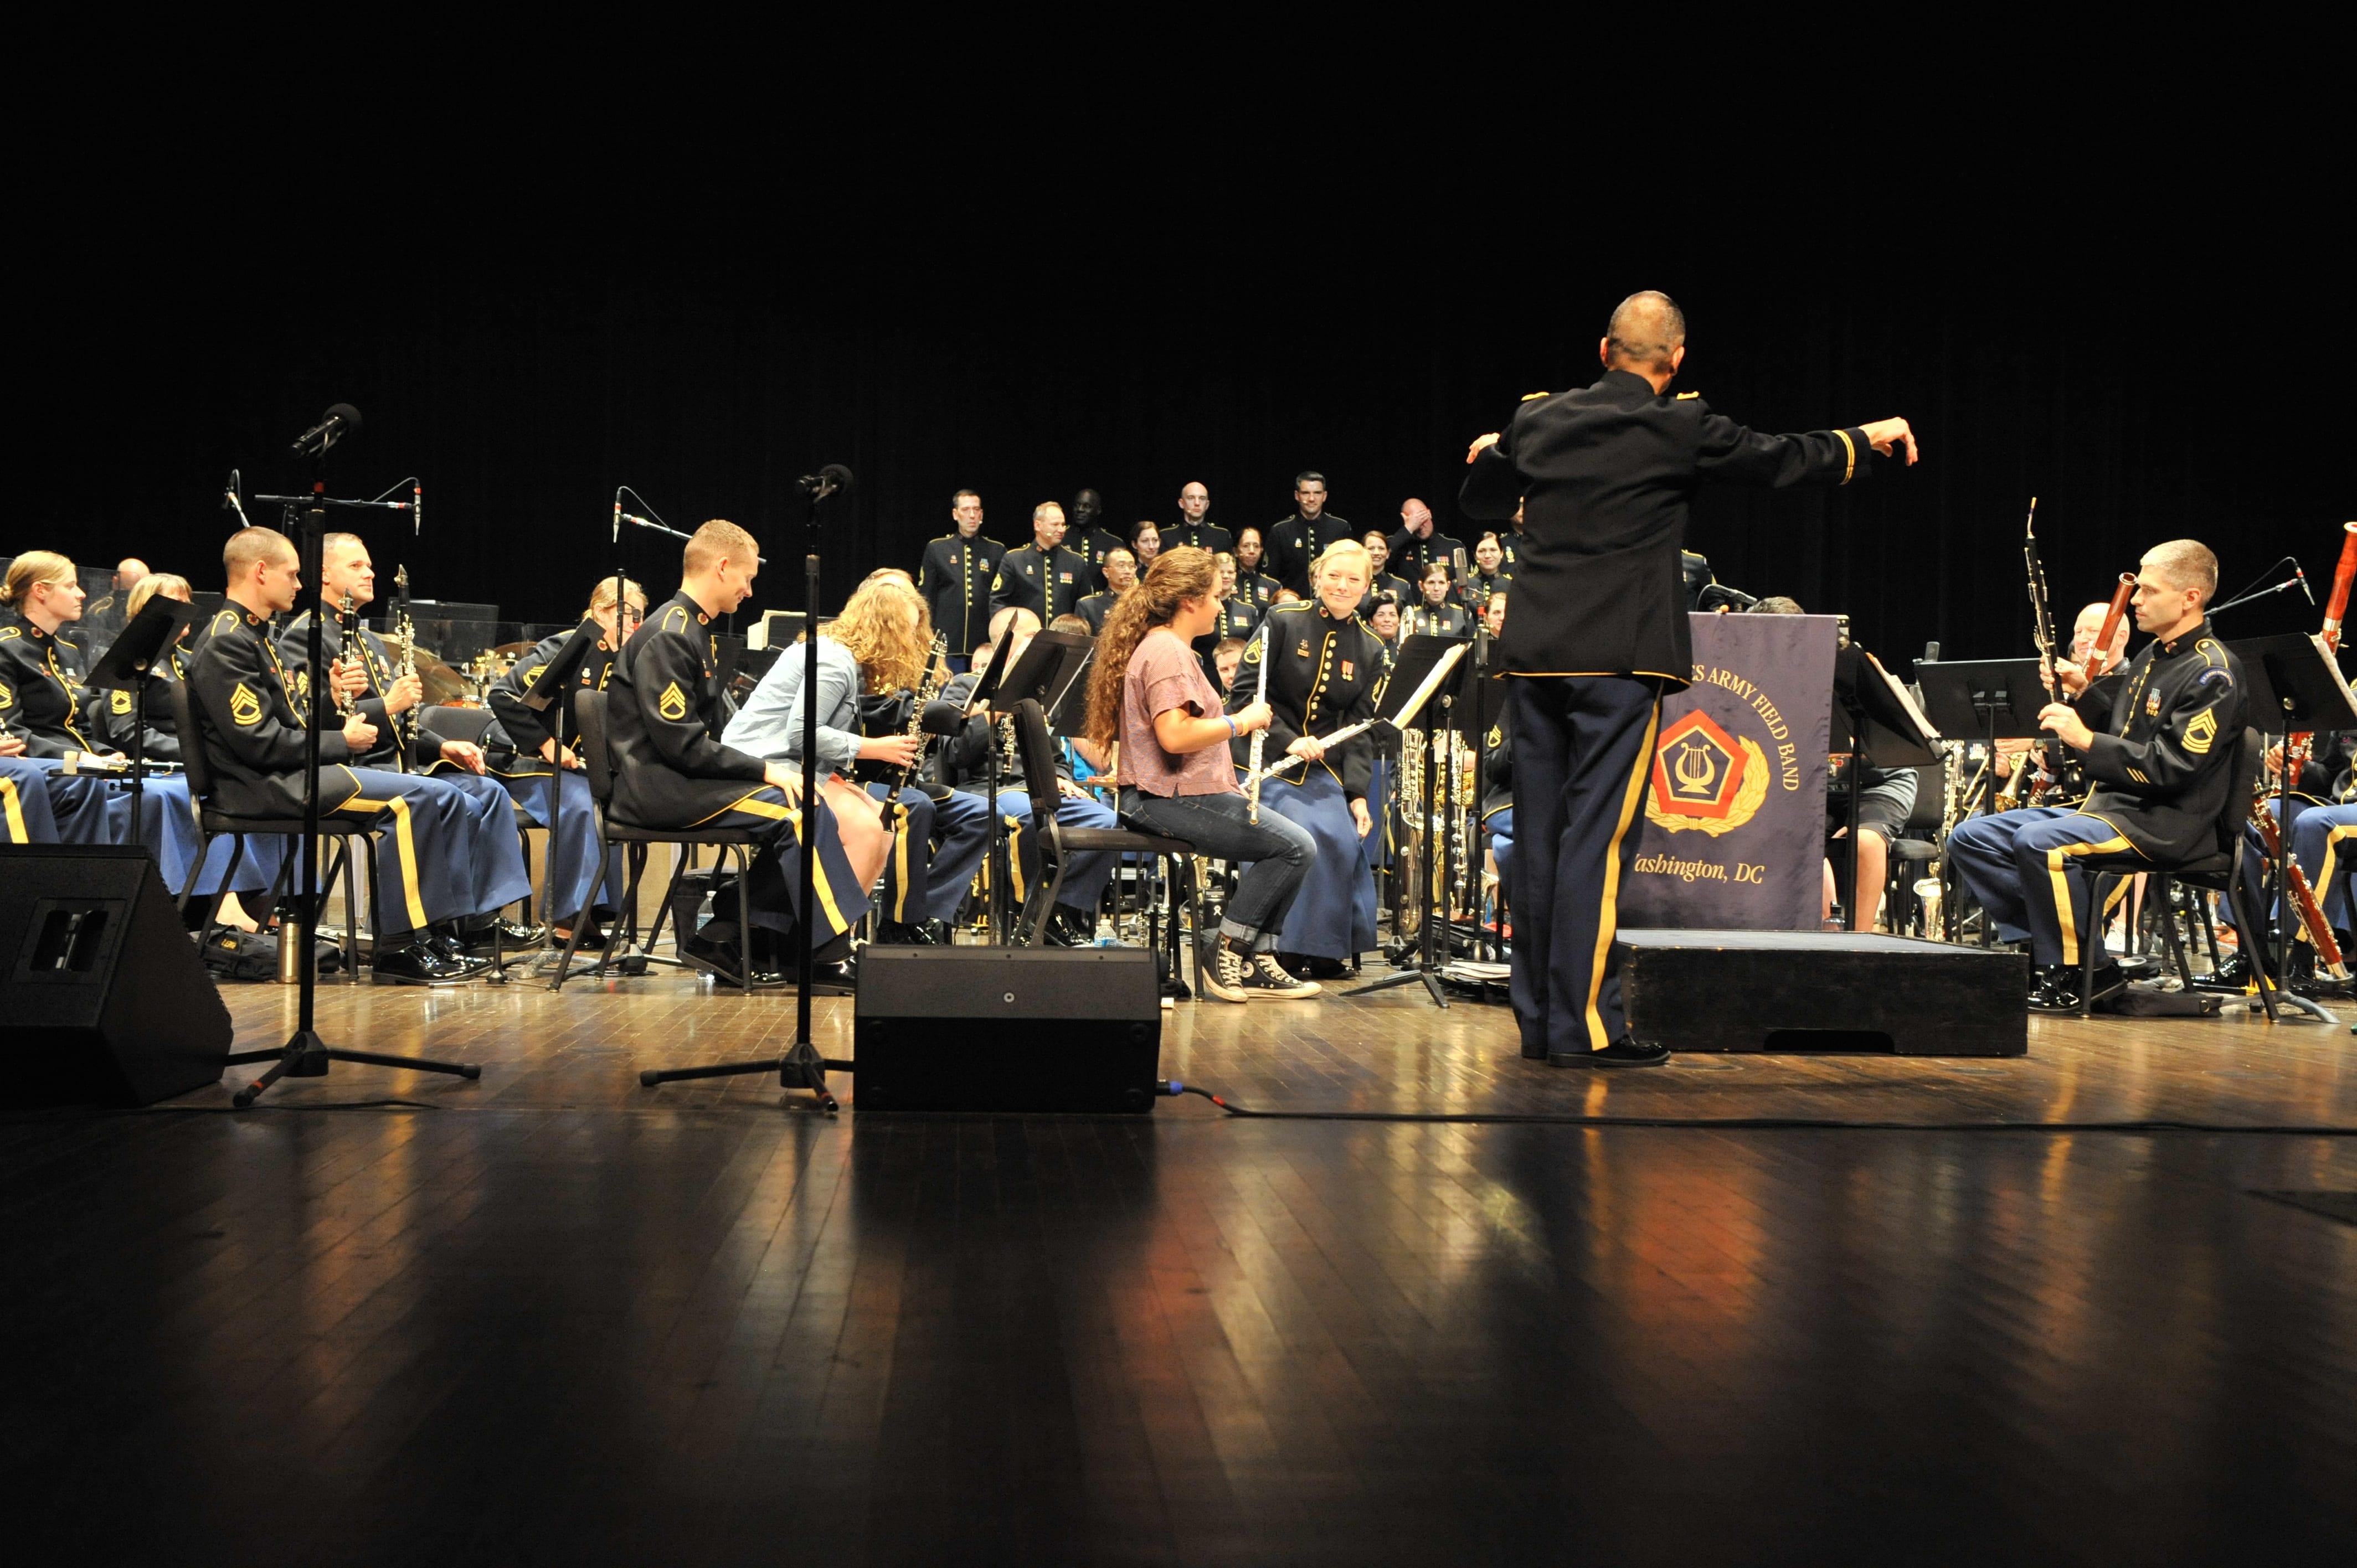 The U.S. Army Field Band & Soldiers’ Chorus